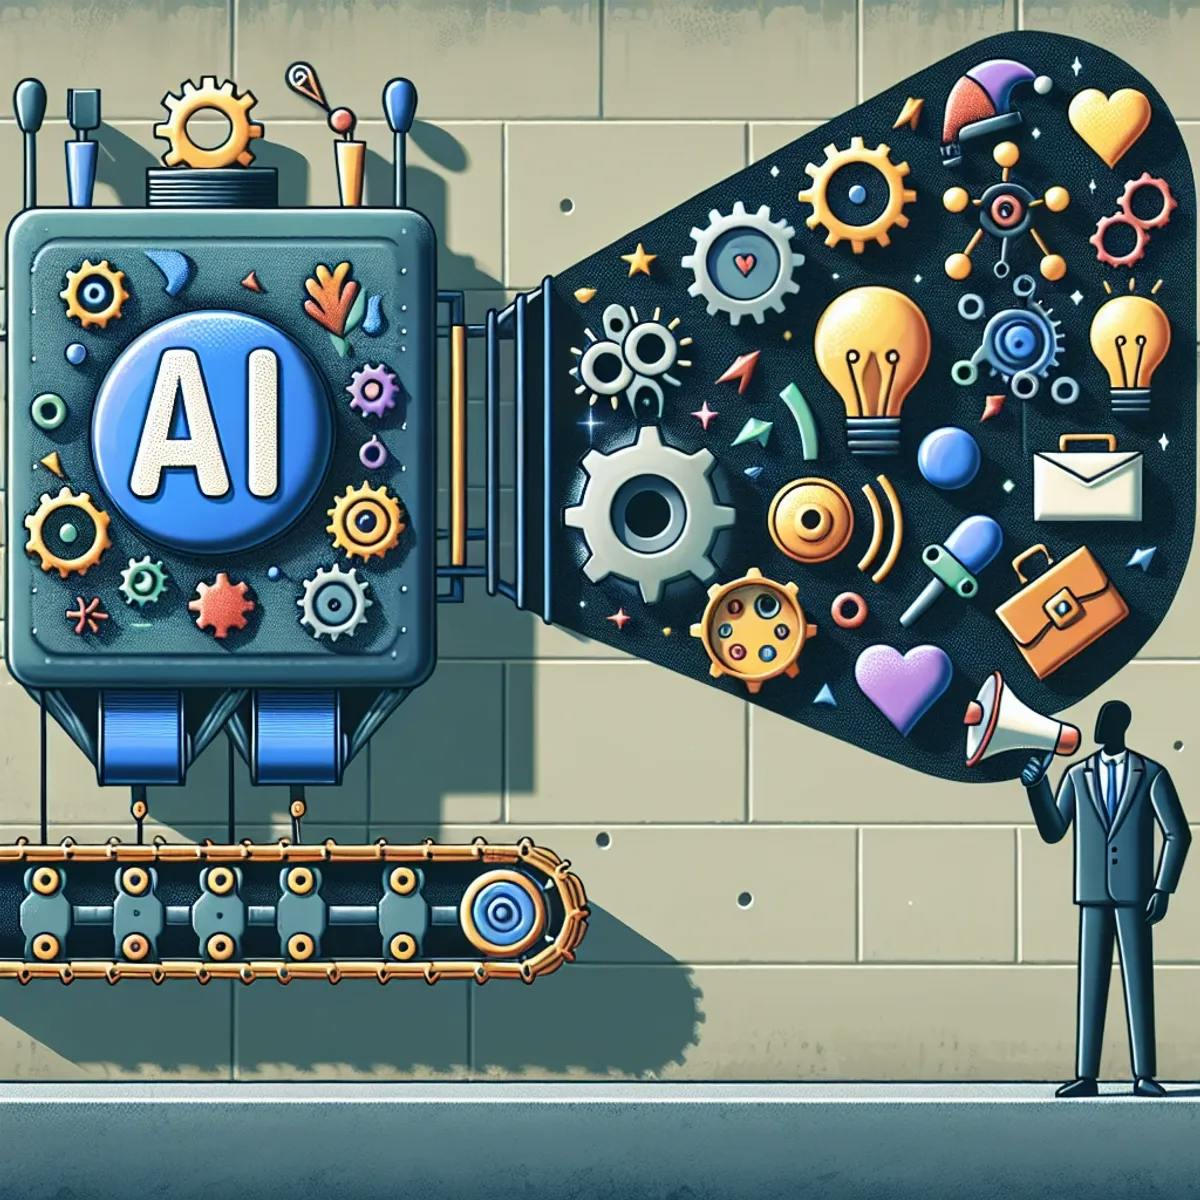 AI writing and brand voice: A large machine with a conveyor belt, creative gears, cogs, and an abstract figure next to it holding a megaphone projecting symbols representing unique brand voices like a playful jester's hat, a serious briefcase, a compassionate heart, and a quirky star.